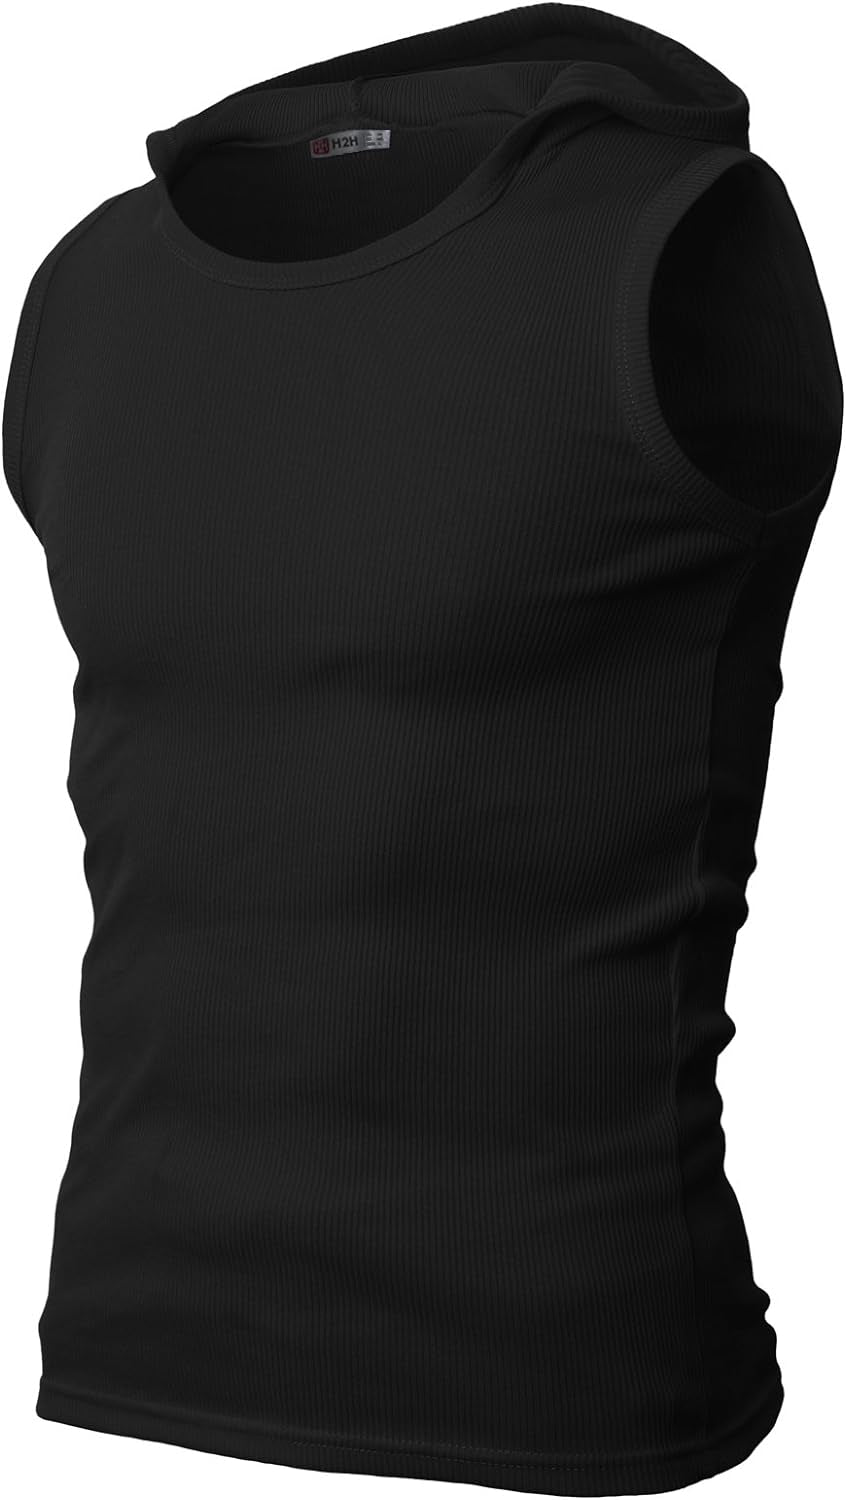 Men'S Casual Slim Fit Hoodie Tank Tops Gym Workout Sleeveless T Shirt